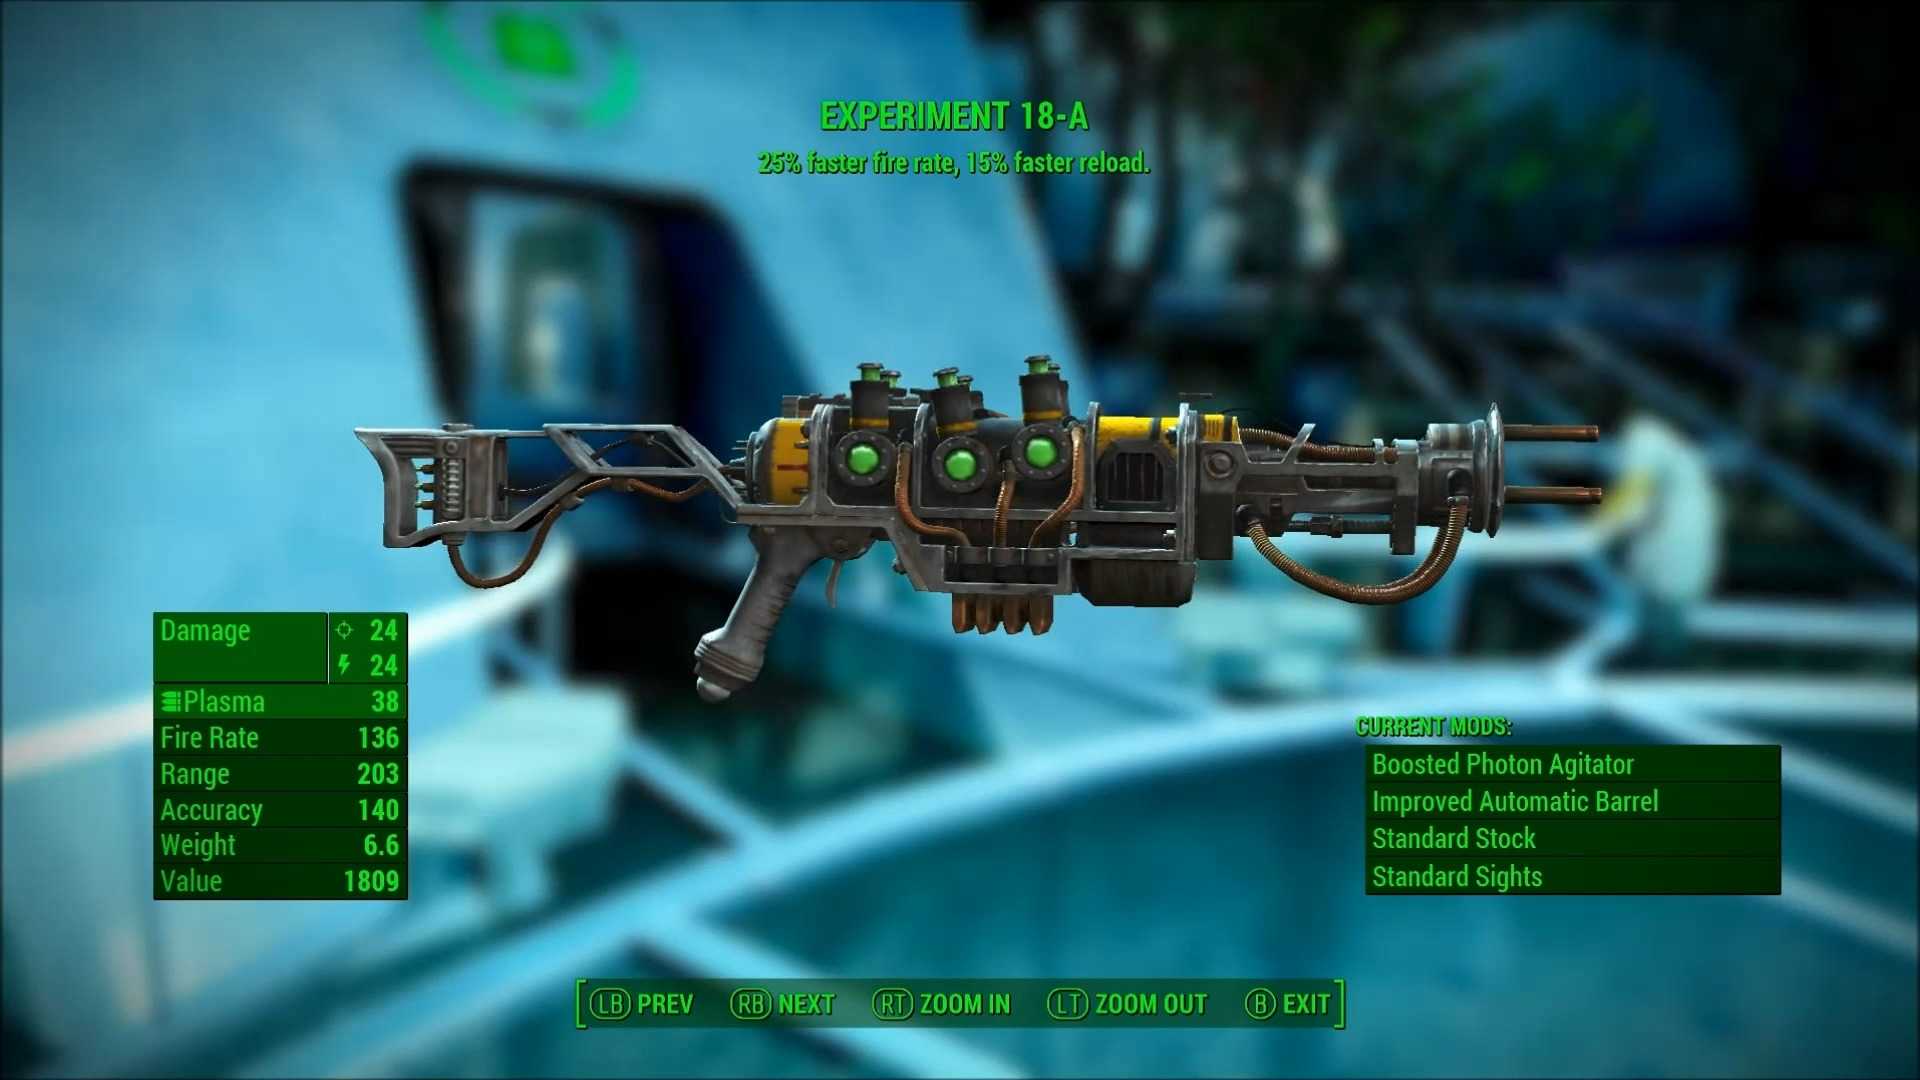 Experiment 18-A in Fallout 4